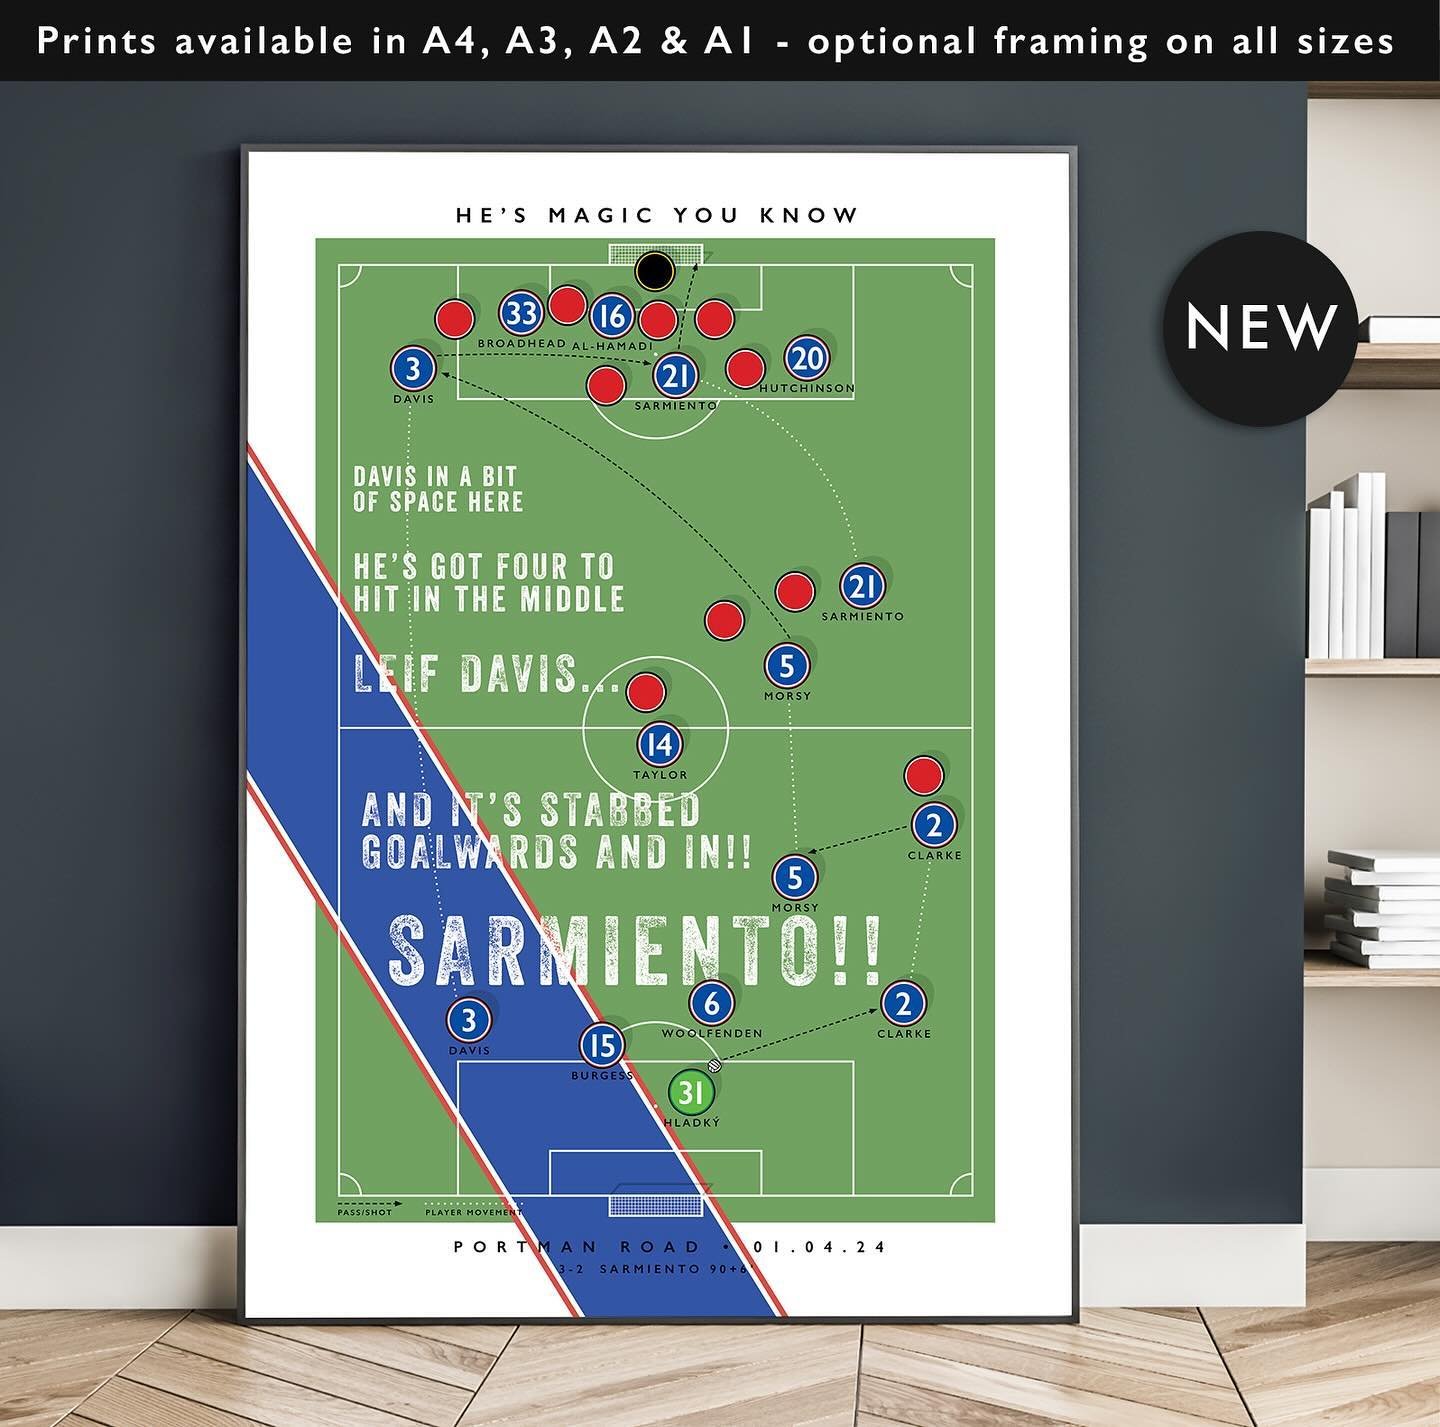 NEW: Ipswich Town Sarmiento Goal - He&rsquo;s Magic You Know

Get 10% off until midnight with the discount code:
THE-TRACTOR-BOYS 

Shop now: matthewjiwood.com/goooal/sarmien&hellip;

Prints available in A4, A3, A2 &amp; A1 with optional framing

#IT